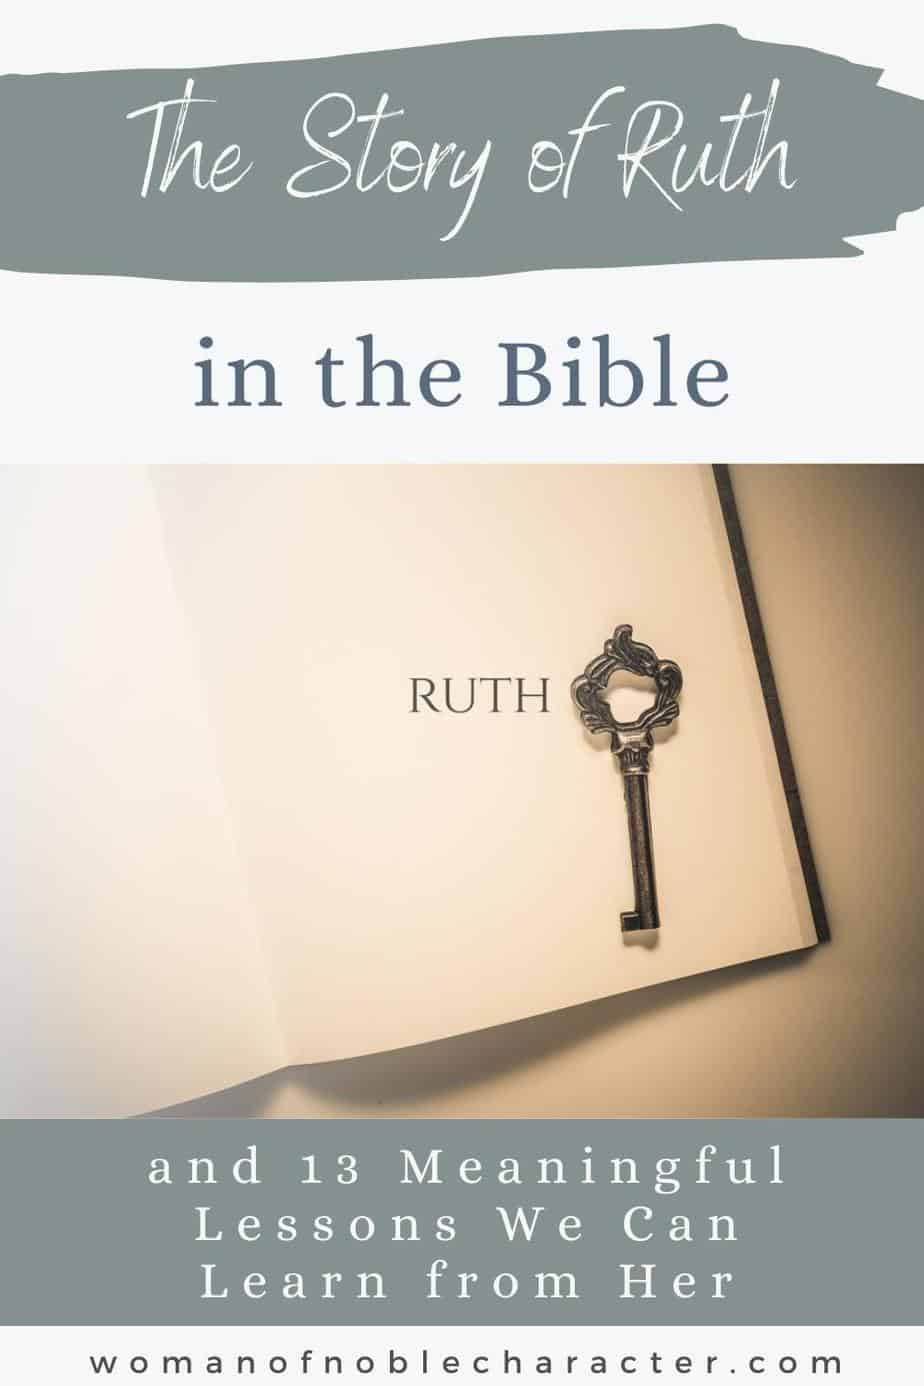 image of open book with Ruth printed on it and old-fashioned key with text overlay The Story of Ruth and Naomi and 12 Meaningful Lessons We Can Learn from Ruth in the Bible